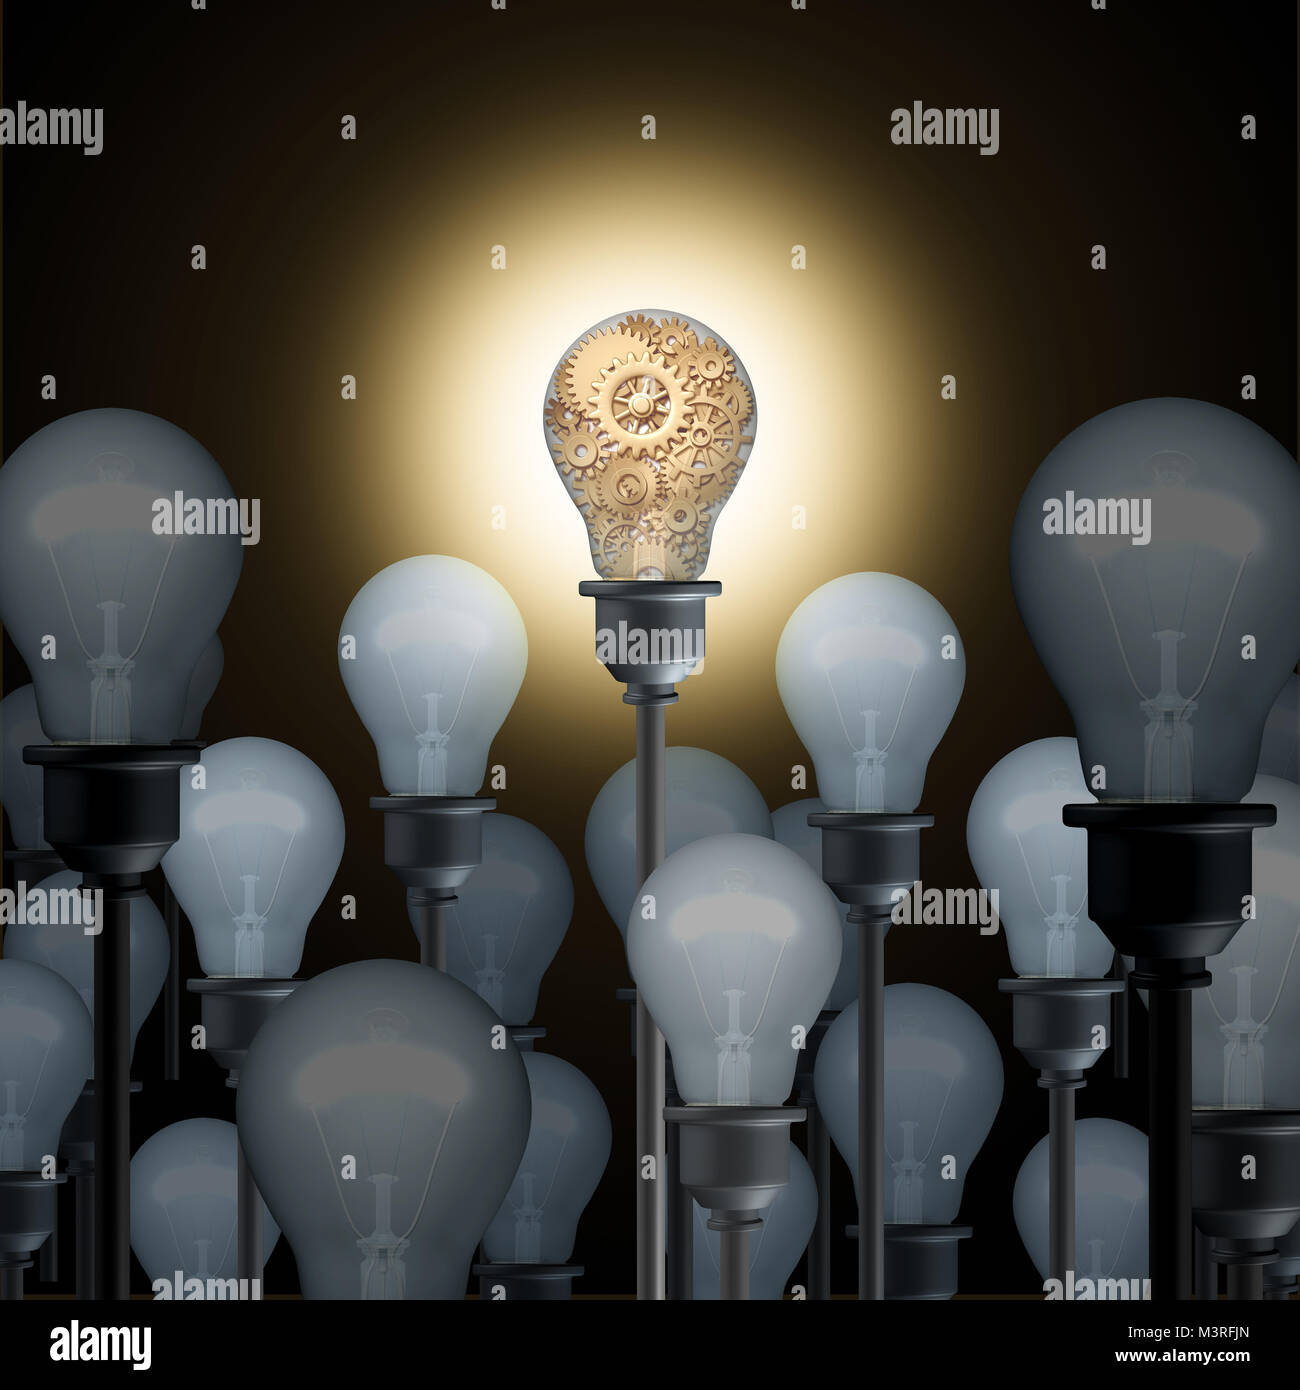 Innovation concept with light bulbs as a business or industry technology ingenuity idea and inspiration symbol as a 3D illustration. Stock Photo